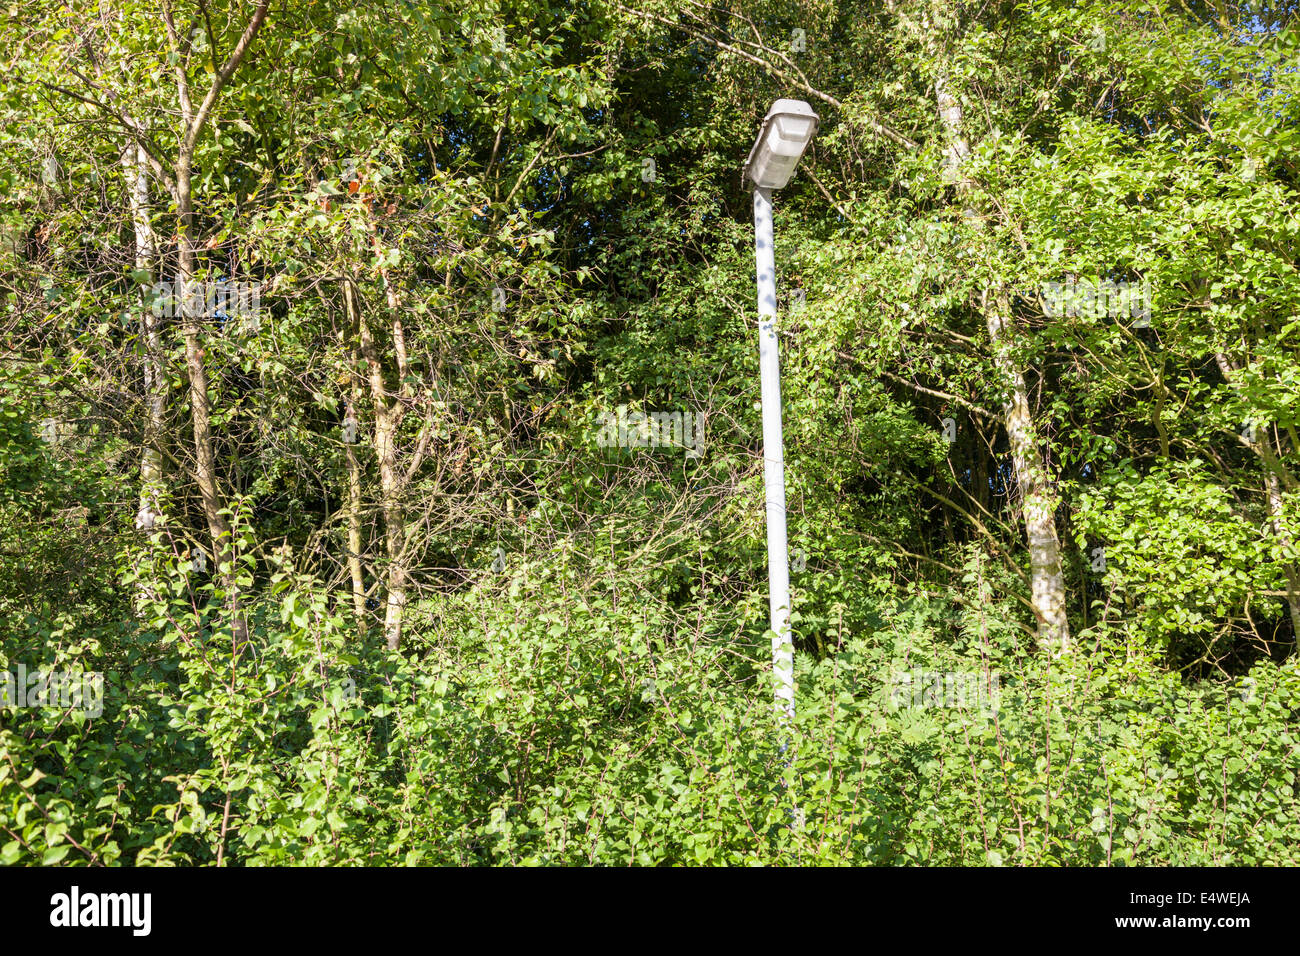 Lamppost and streetlight becoming overgrown and hidden by trees, Nottinghamshire, England, UK Stock Photo